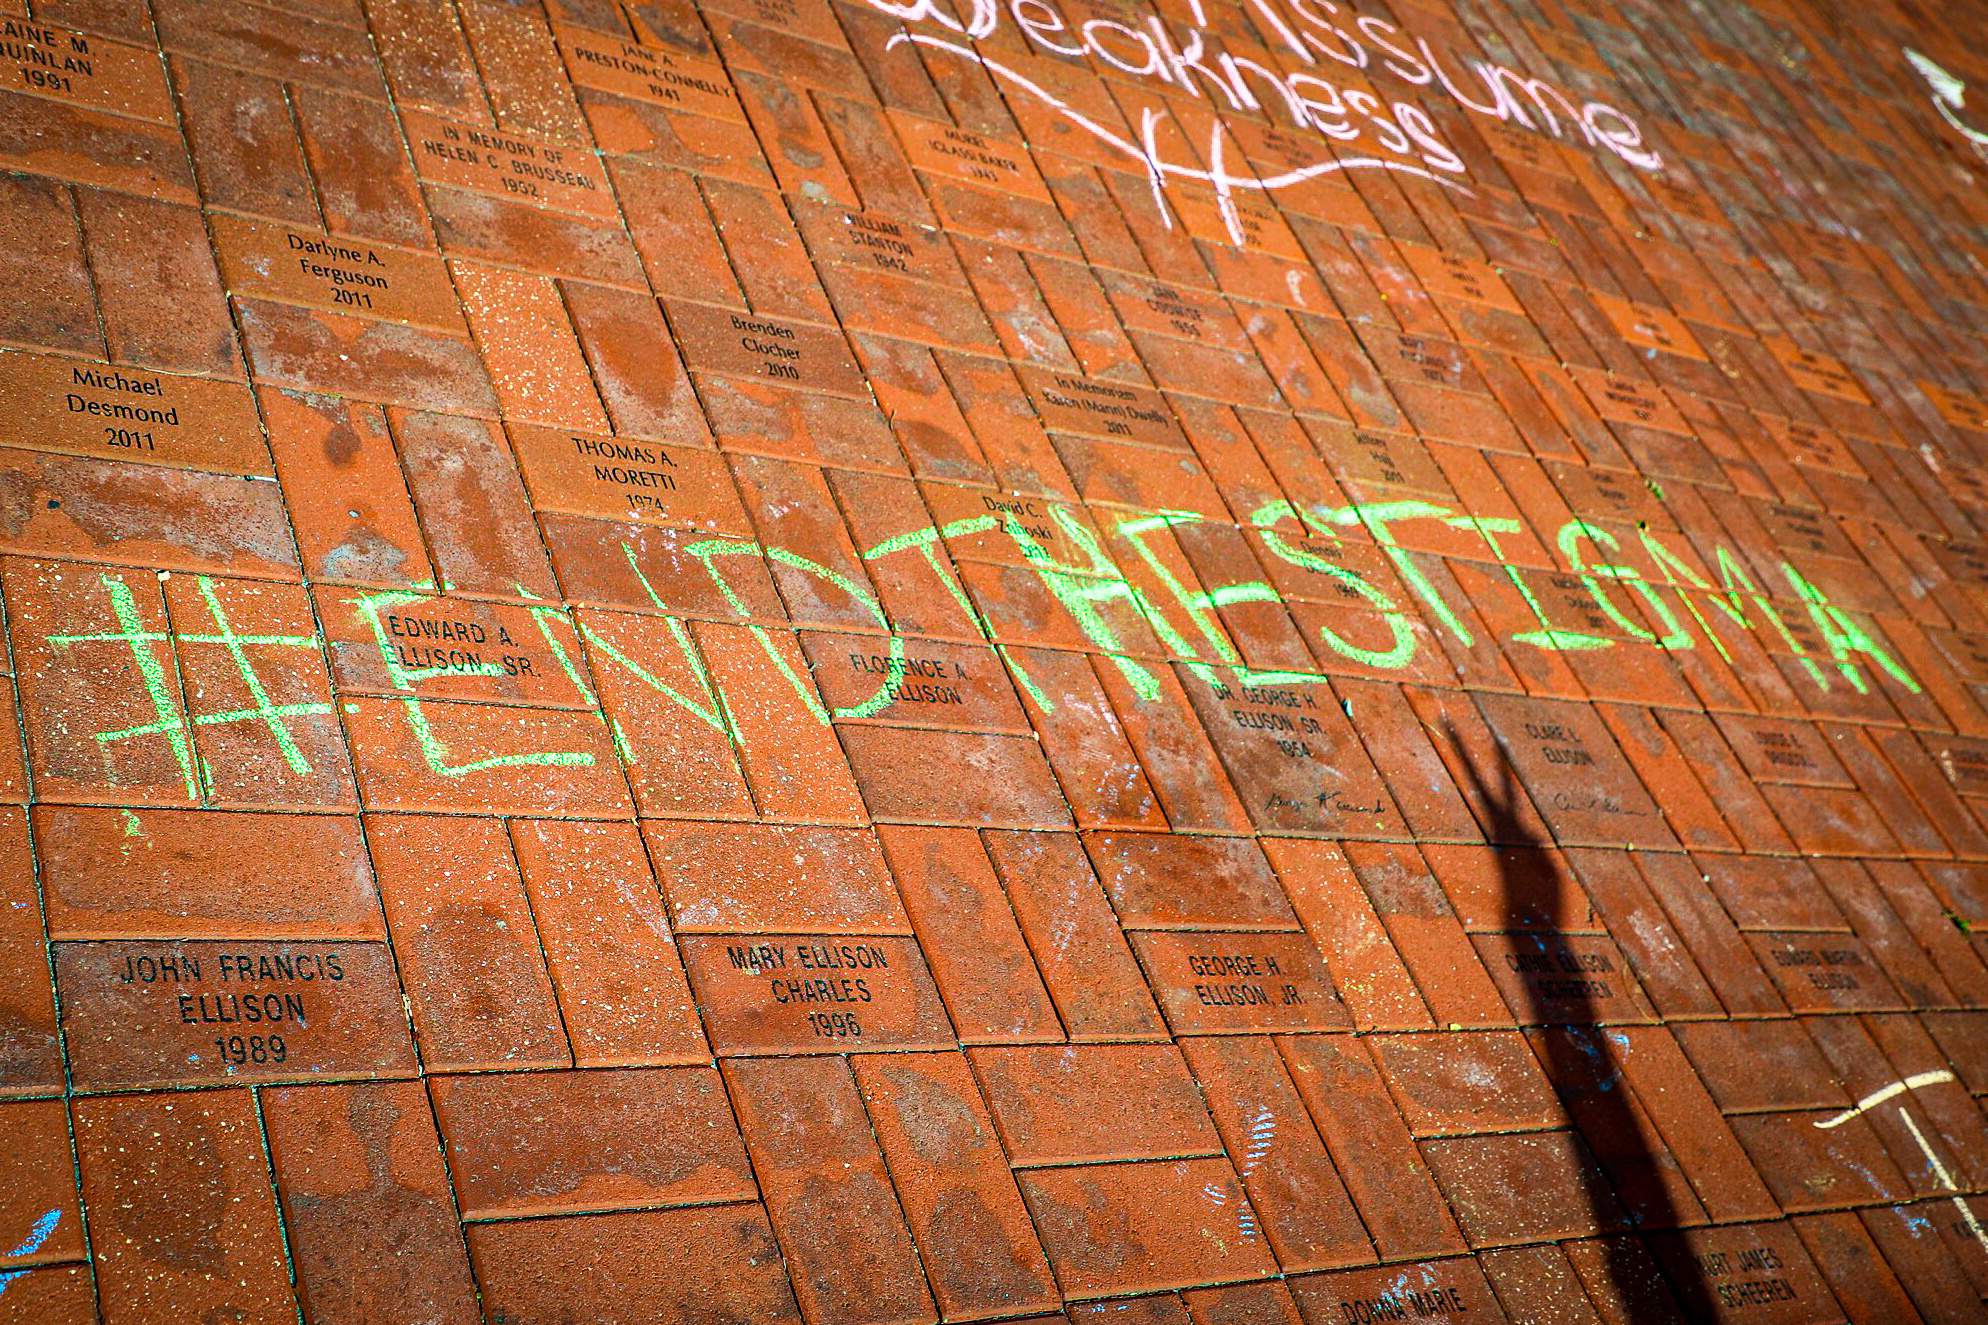 "#End the Stigma" is written in chalk on Alumni Plaza as part of a mental health wellness campaign at Salem State.